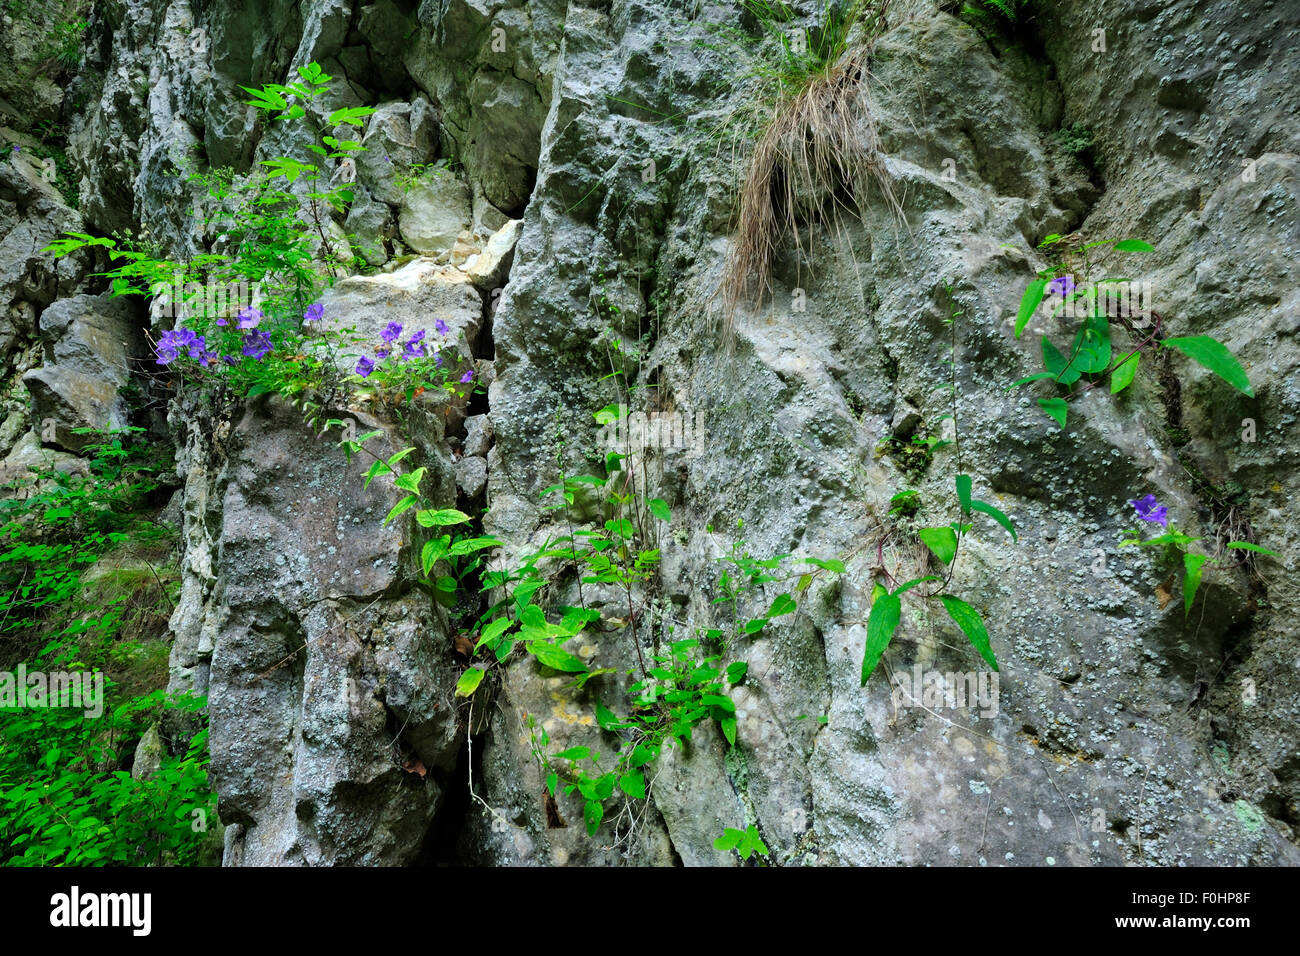 Bellflower (Campanula sp) growing between cracks in the rock face, Crovul Valley Gorge, Arges County, Leota mountain range, Carpathian Mountains, Romania, July Stock Photo